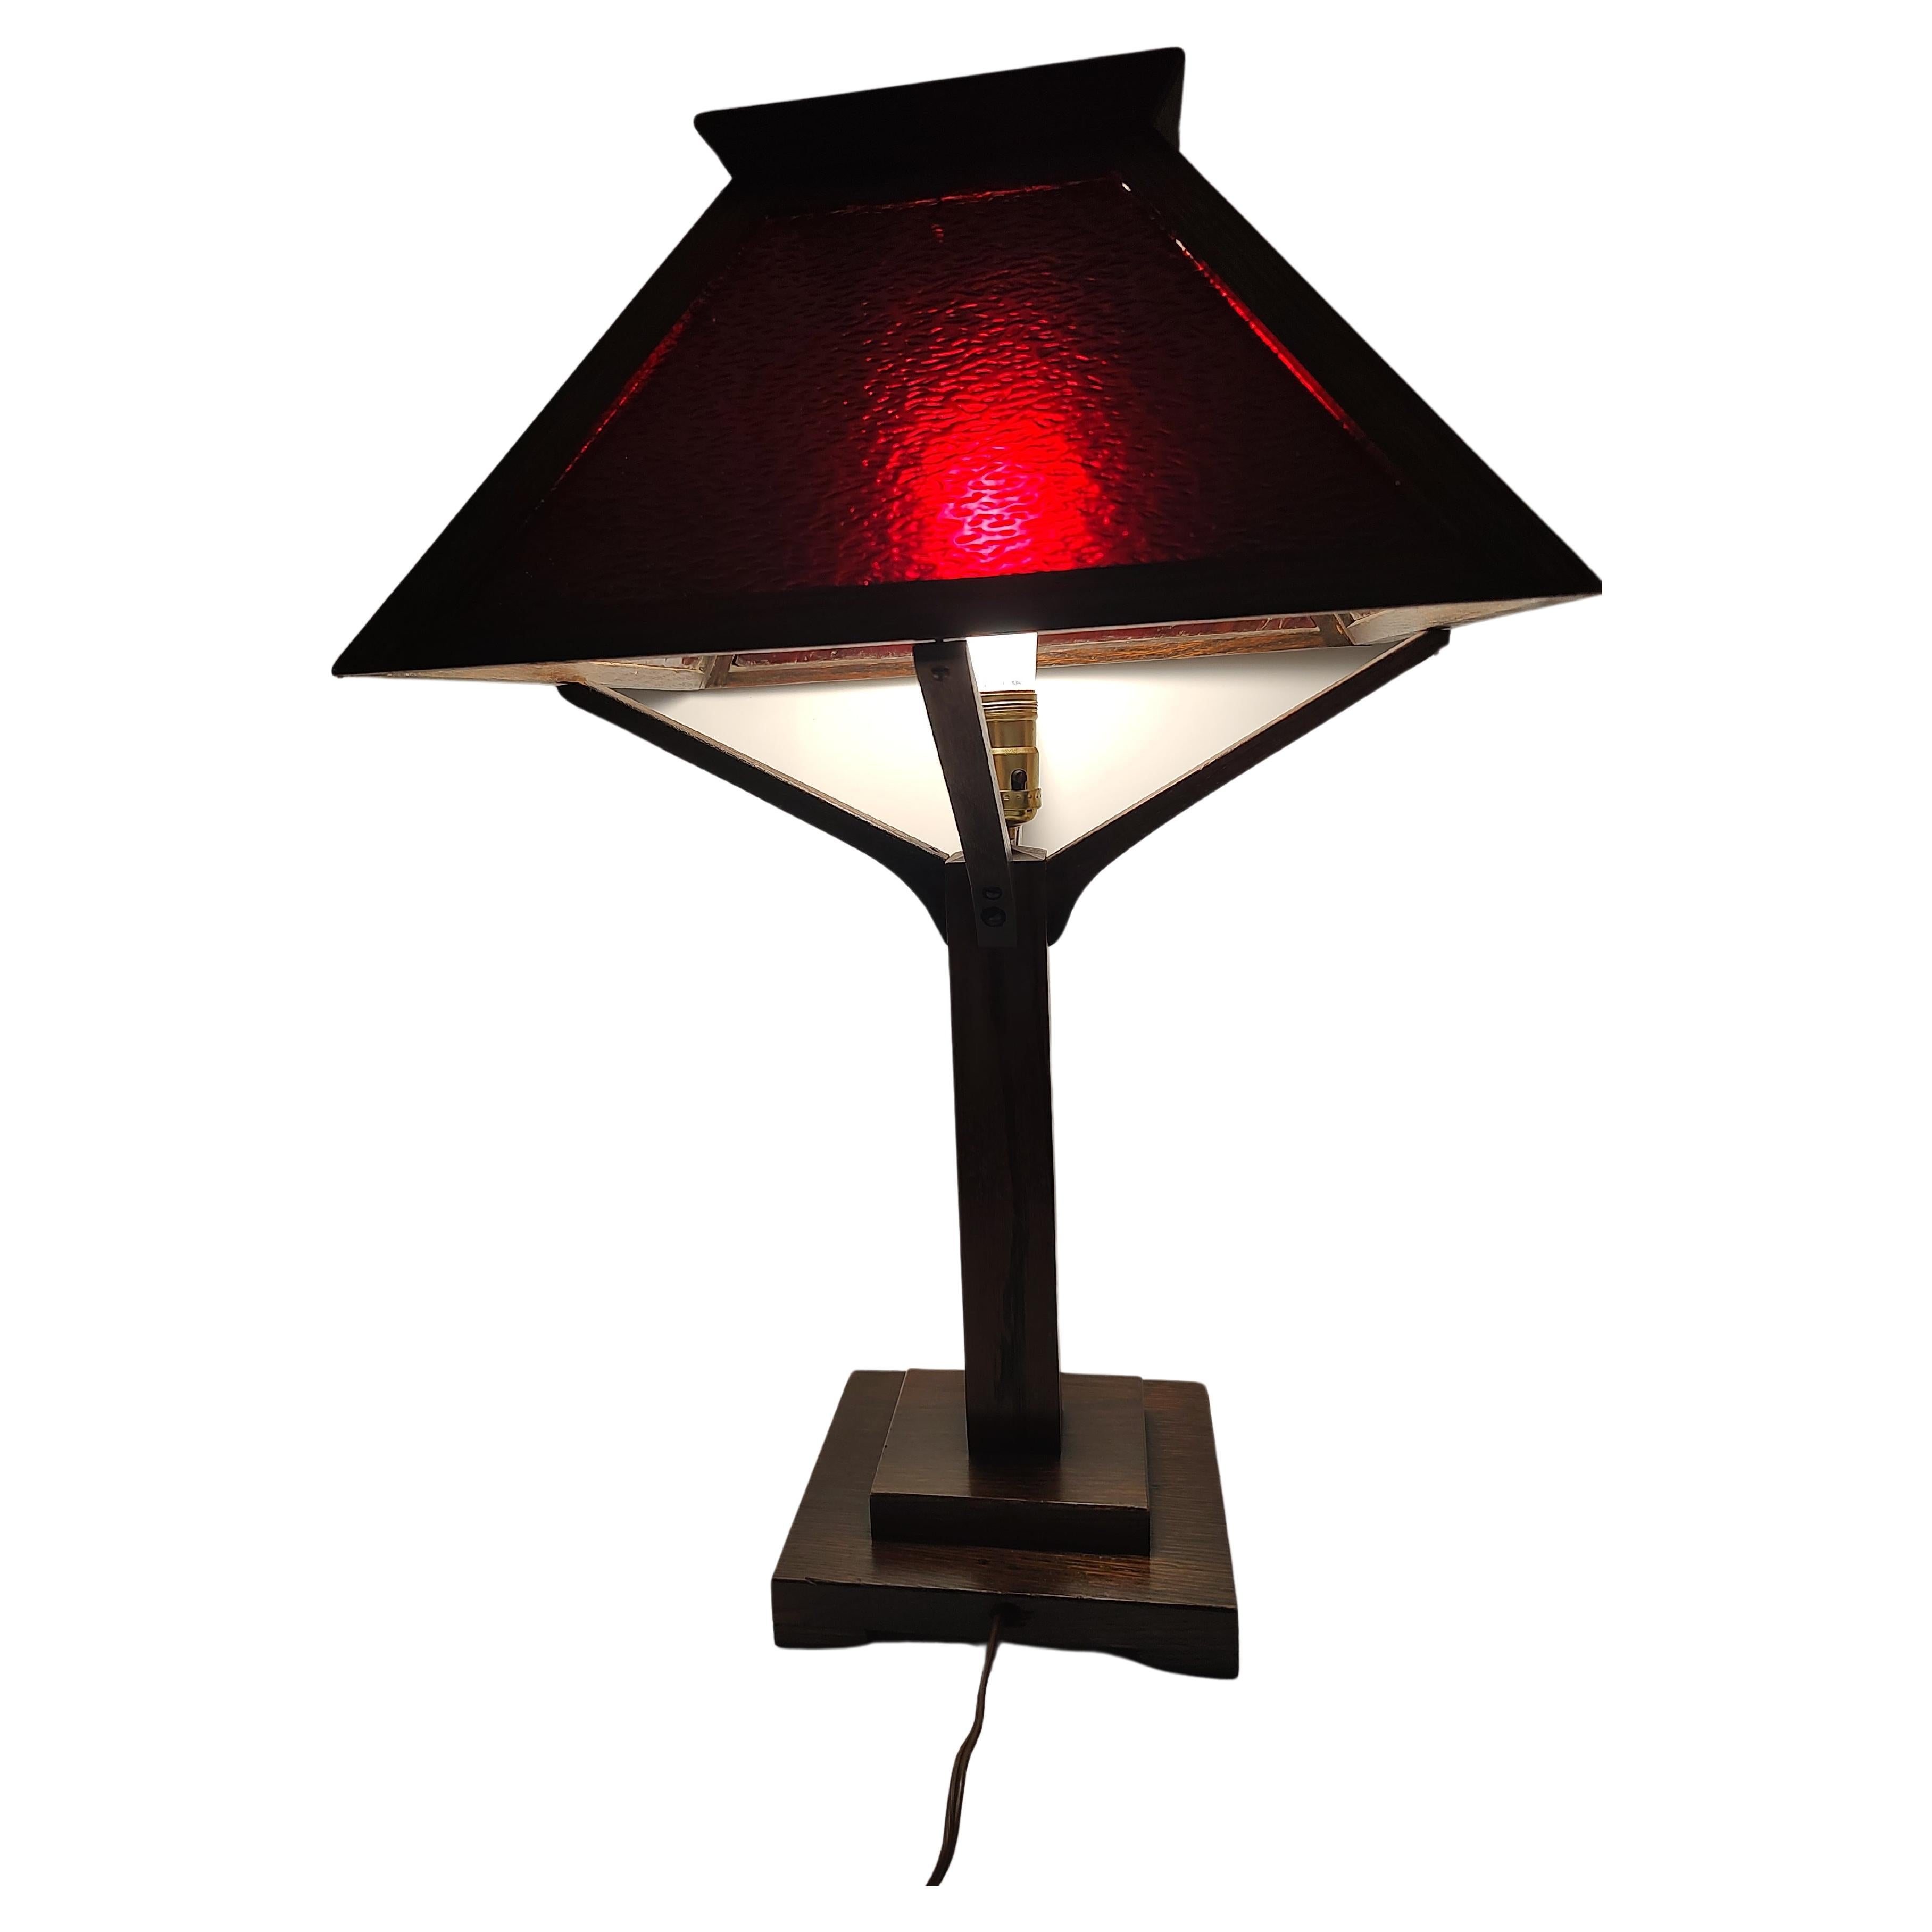 Early 20th Century Arts & Crafts Mission Quarter Sawn Oak with Red Slag Glass Table Lamp, C1910 For Sale